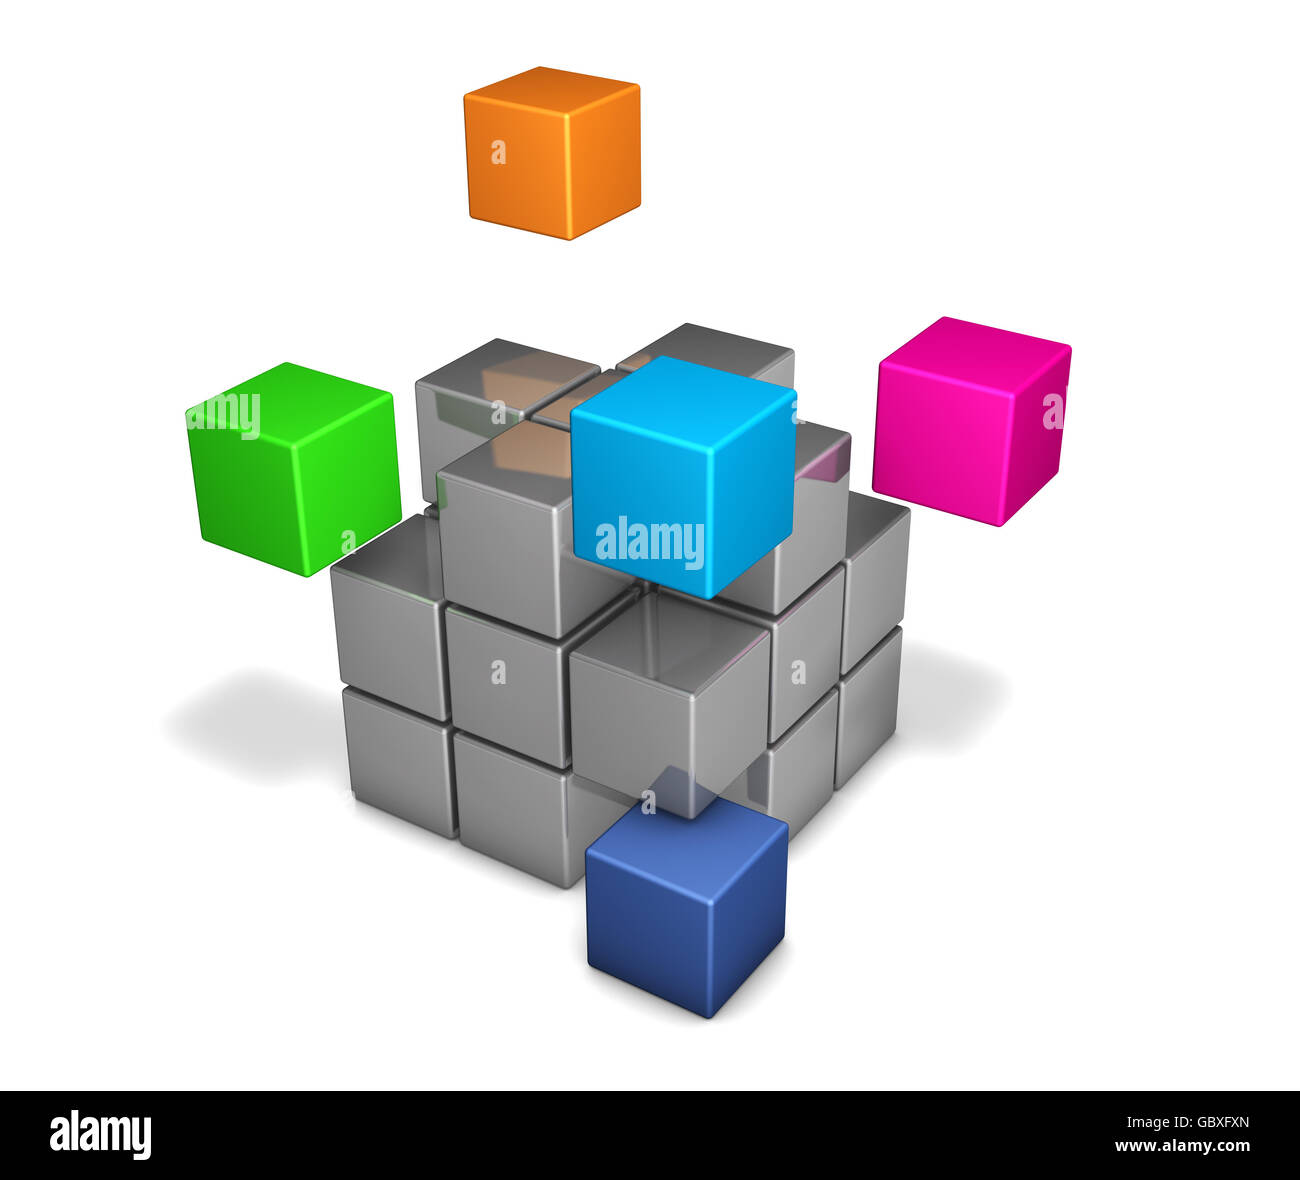 Teamwork and business project collaboration concept with colorful cubes 3D illustration on white. Stock Photo